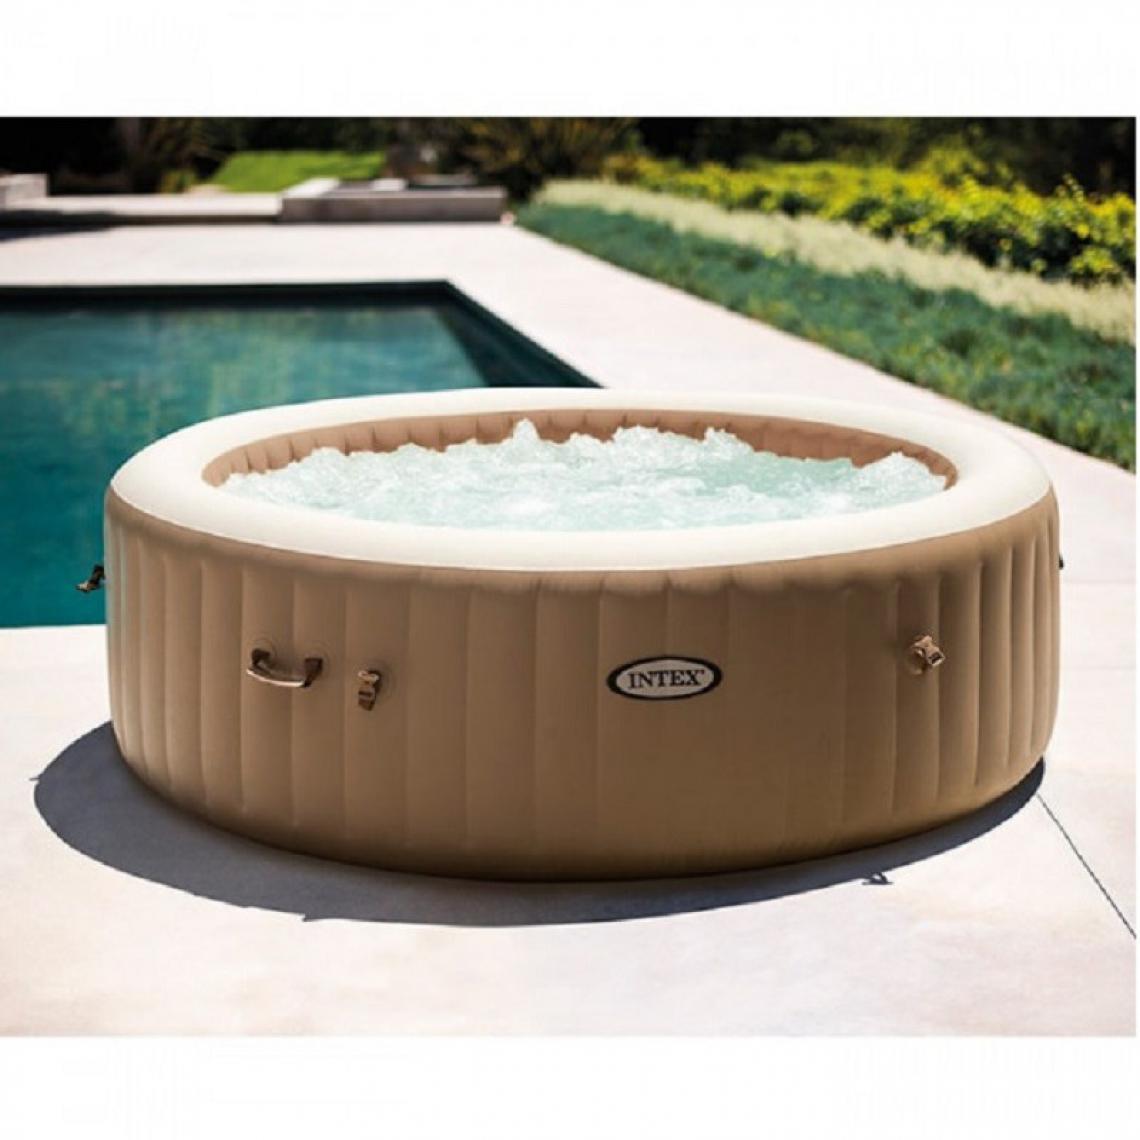 Intex - Spa gonflable Intex rond beige 6 places - Spa gonflable